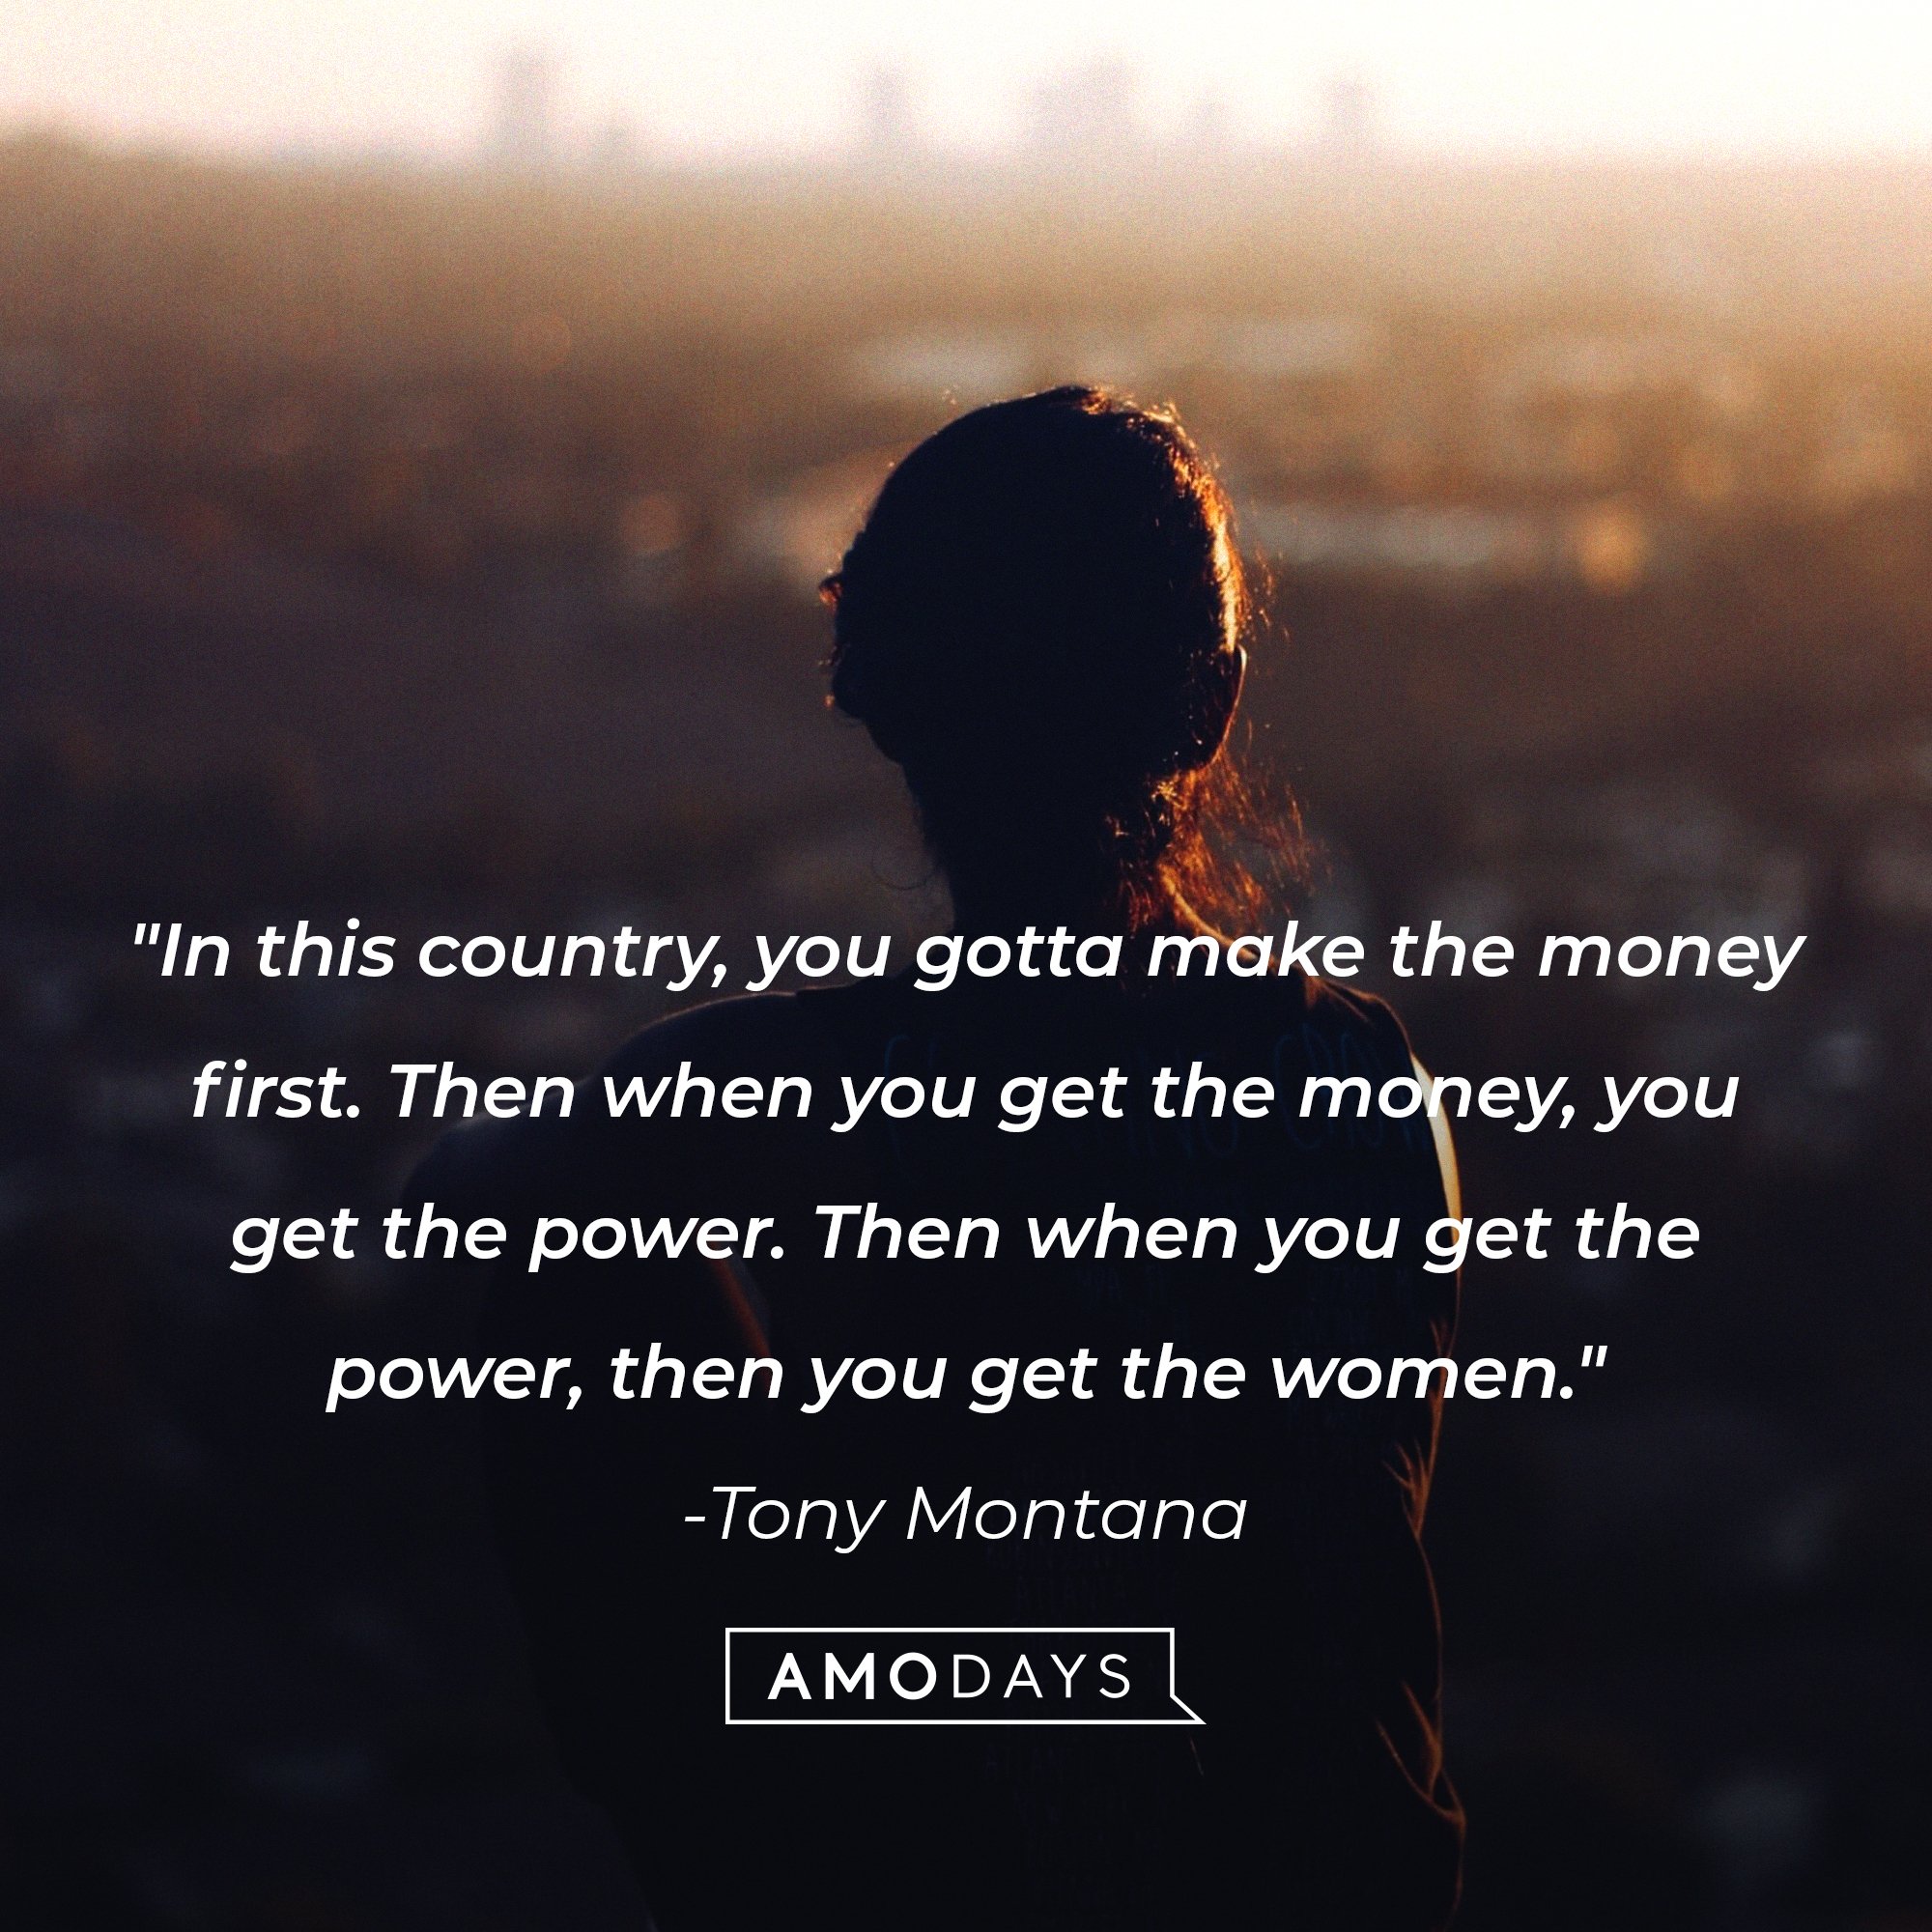 Tony Montana’s quote: "In this country, you gotta make the money first. Then when you get the money, you get the power. Then when you get the power, then you get the women." | Image: AmoDays